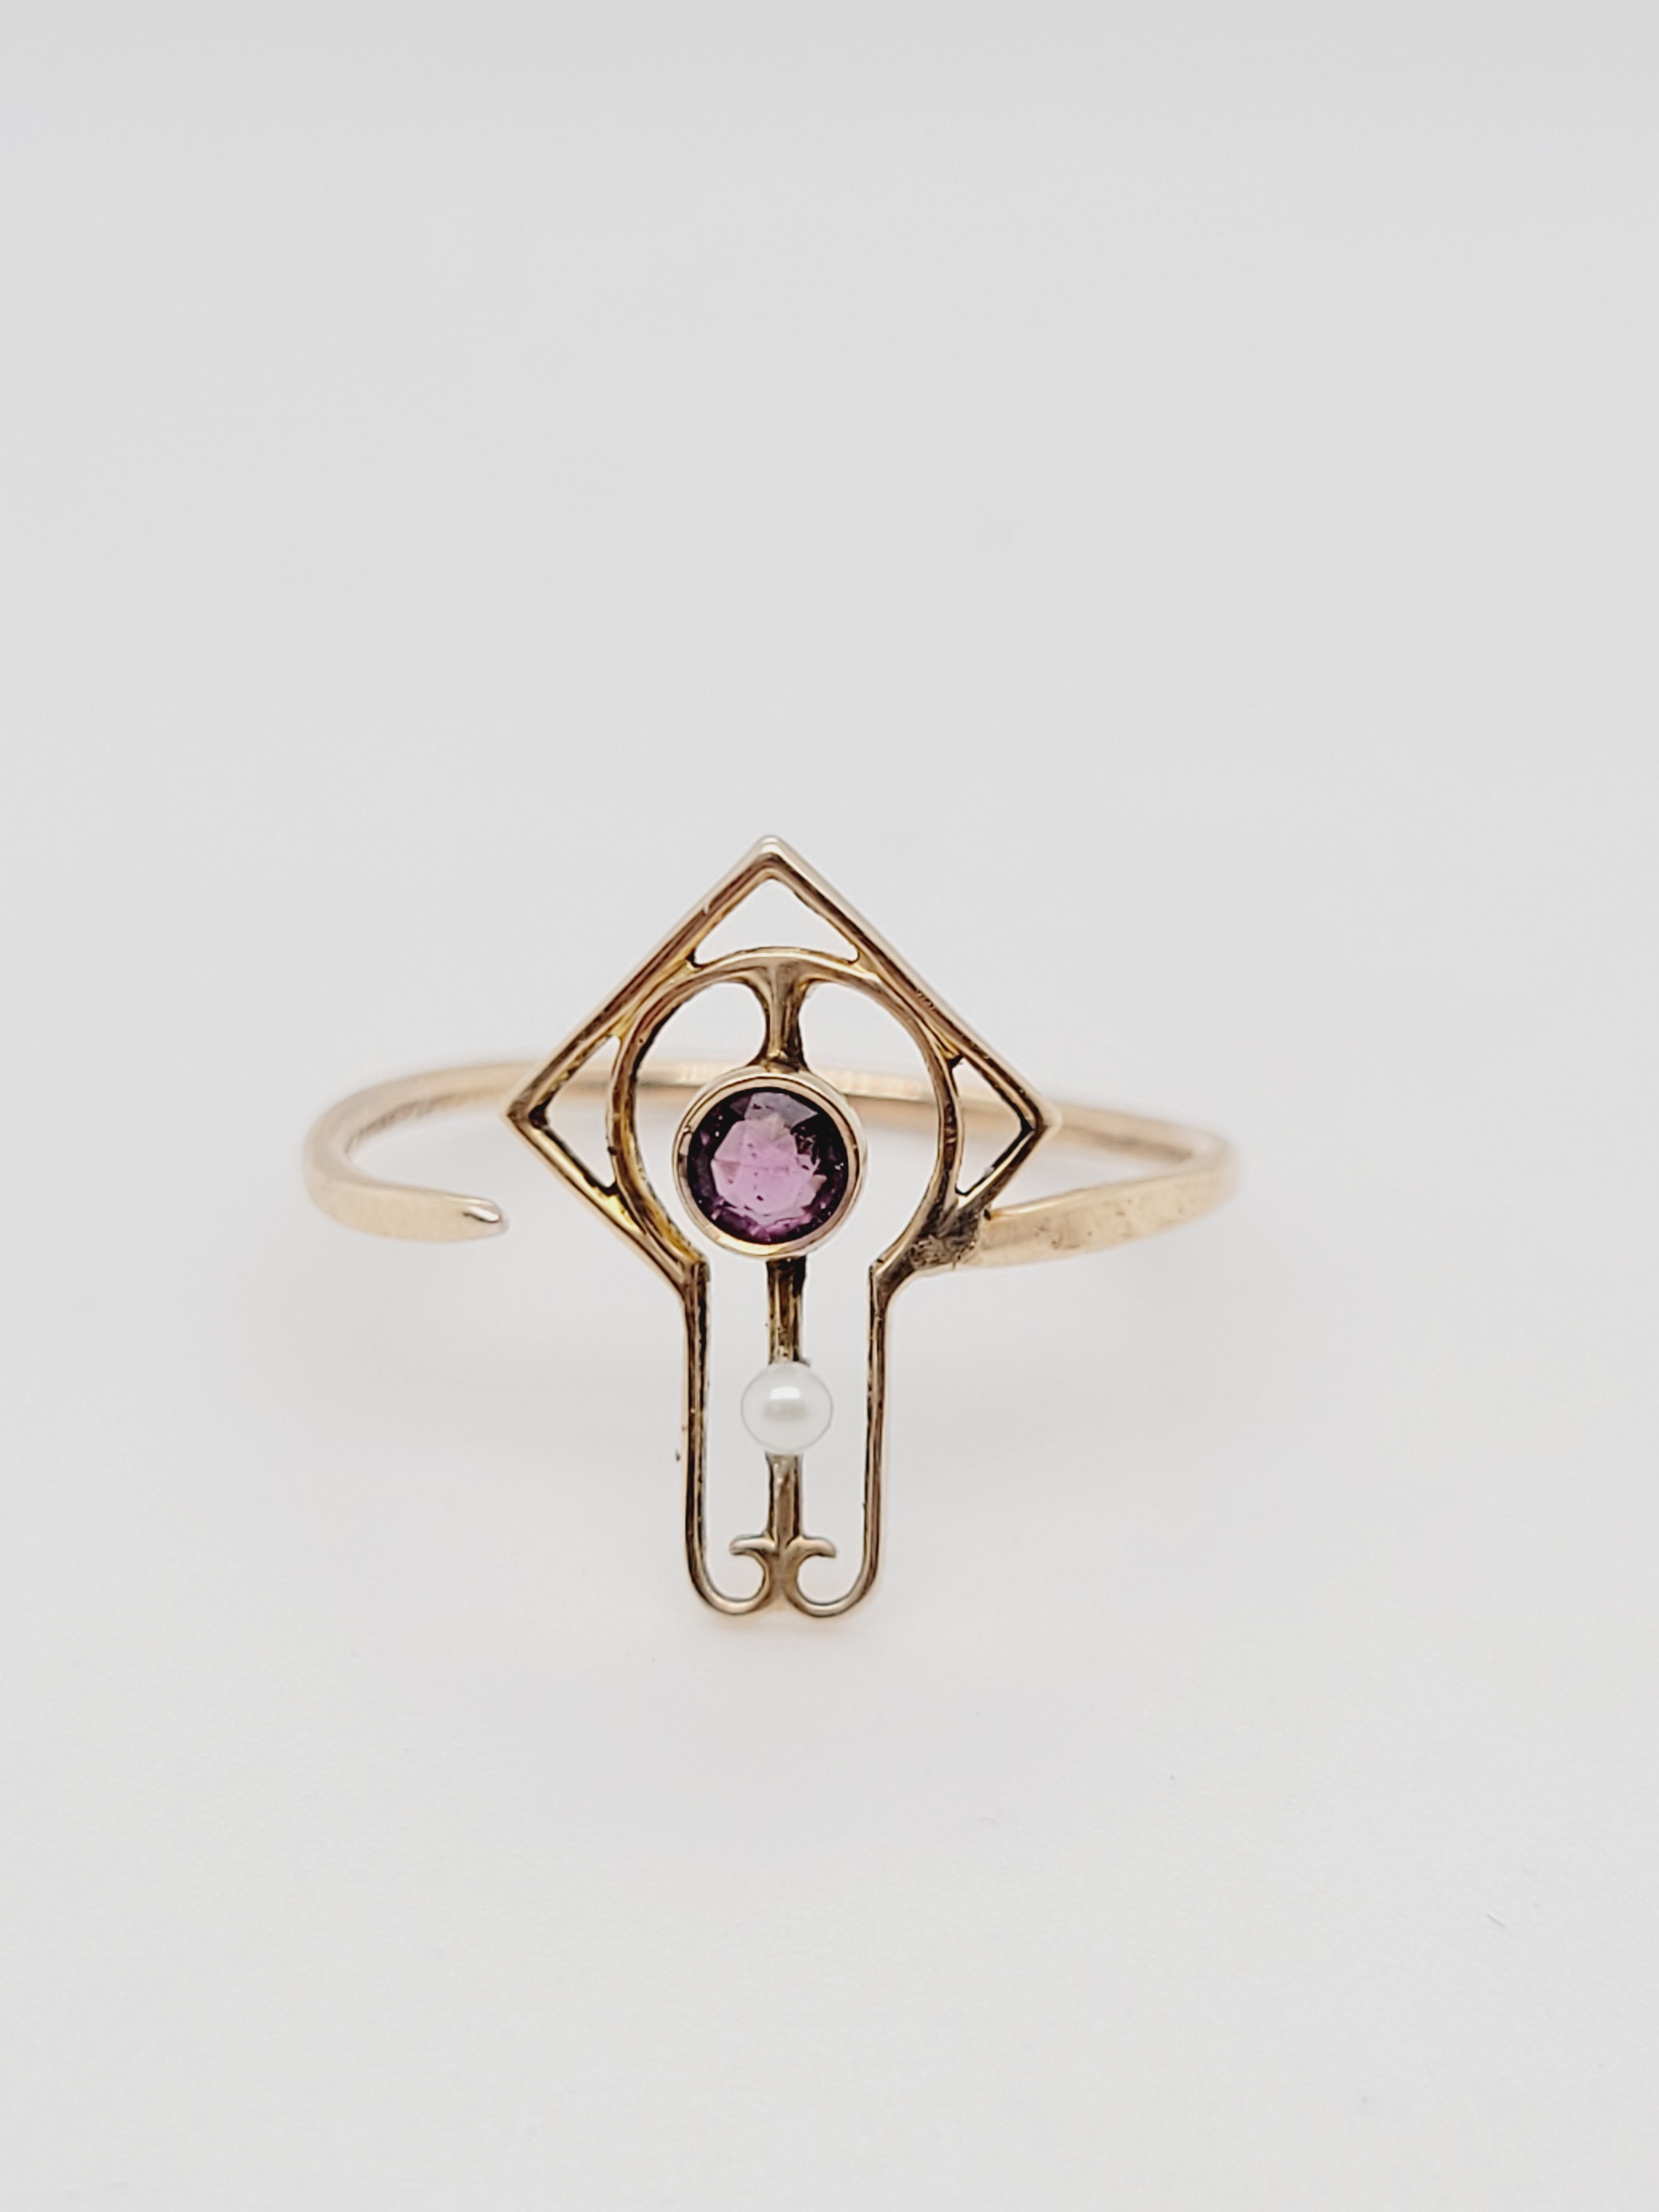 14kw Vintage Up-cycled Pin Ring Pearl/ Amethyst sz6.5